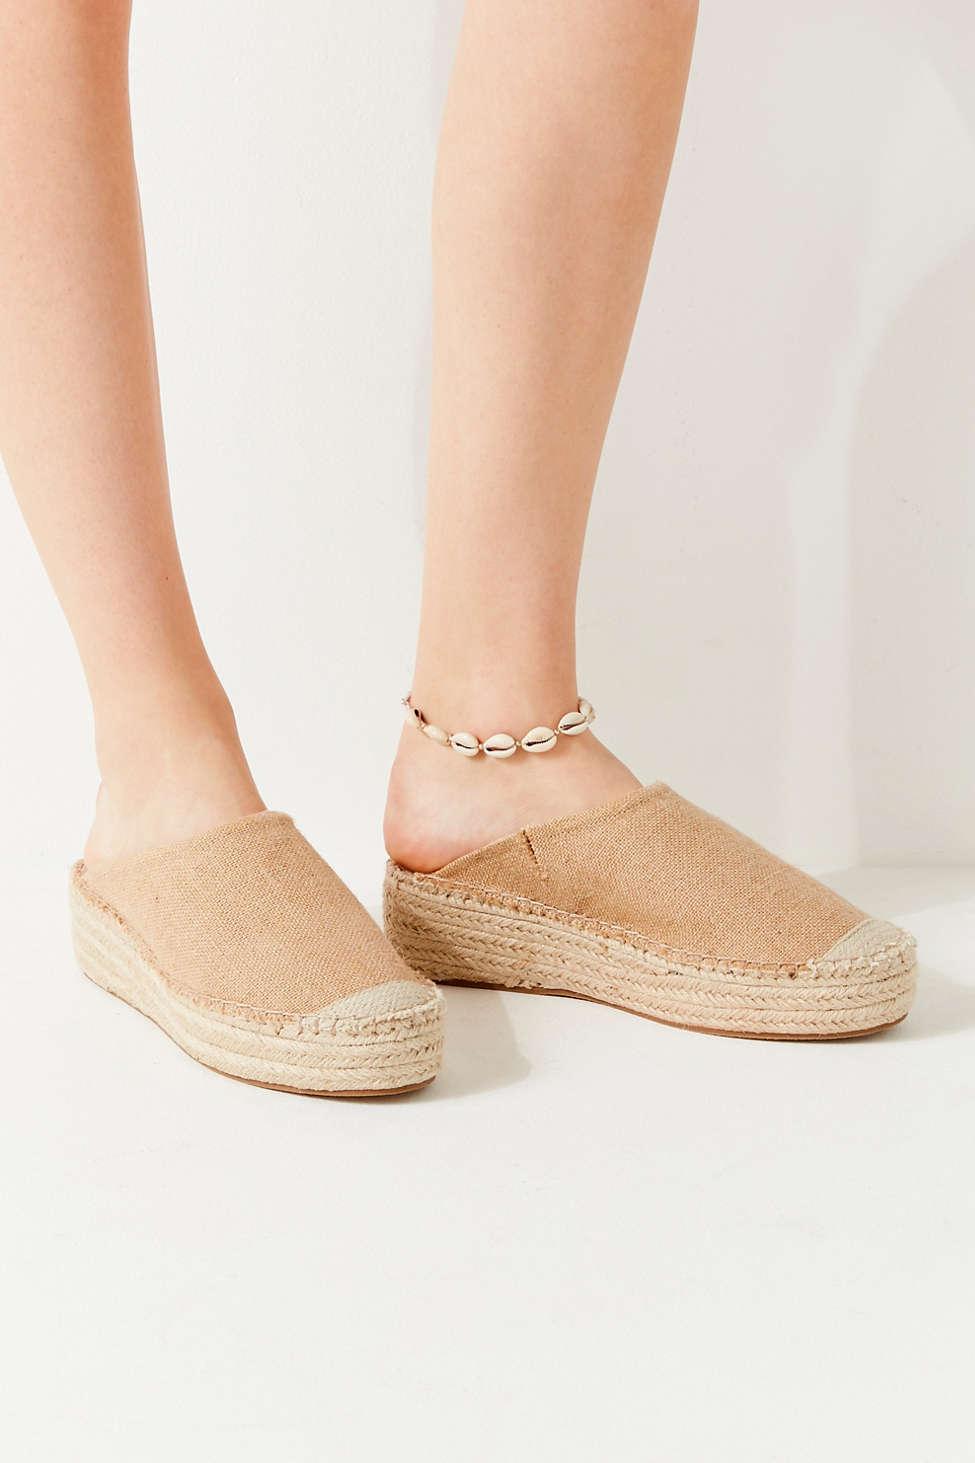 Urban Outfitters Uo Laura Espadrille Mule in Natural - Lyst